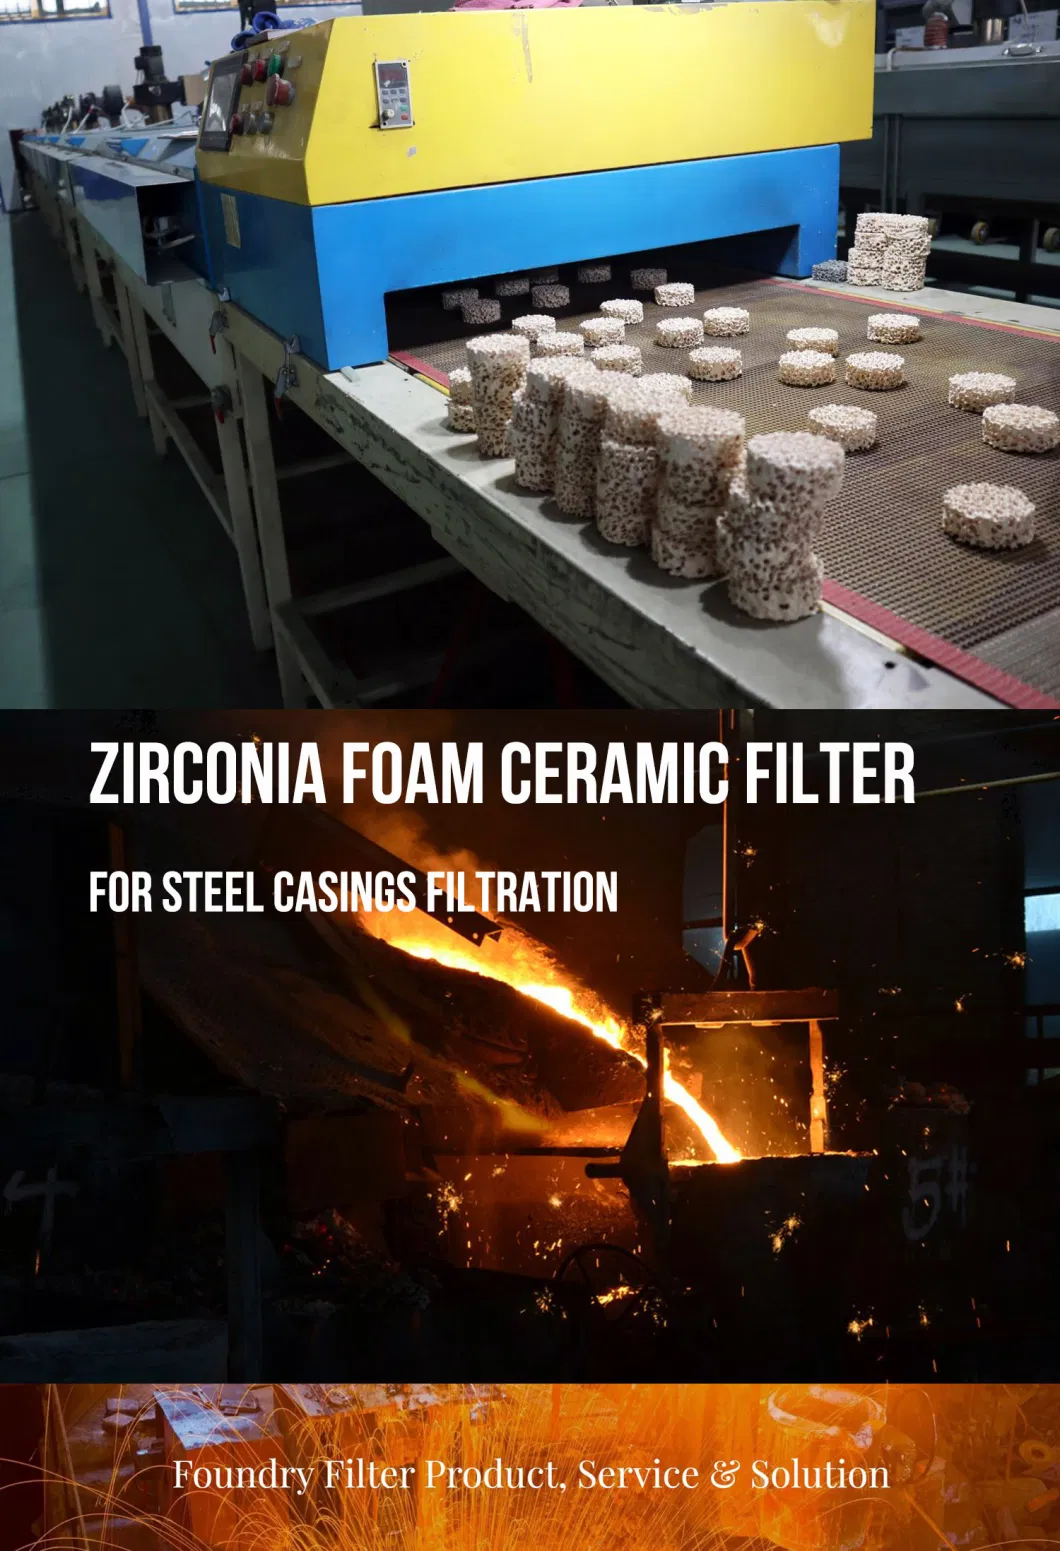 Good Filtration Effect for Stainless Steel or Cobalt-Based or Nickel-Based High-Temperature Alloy Castings